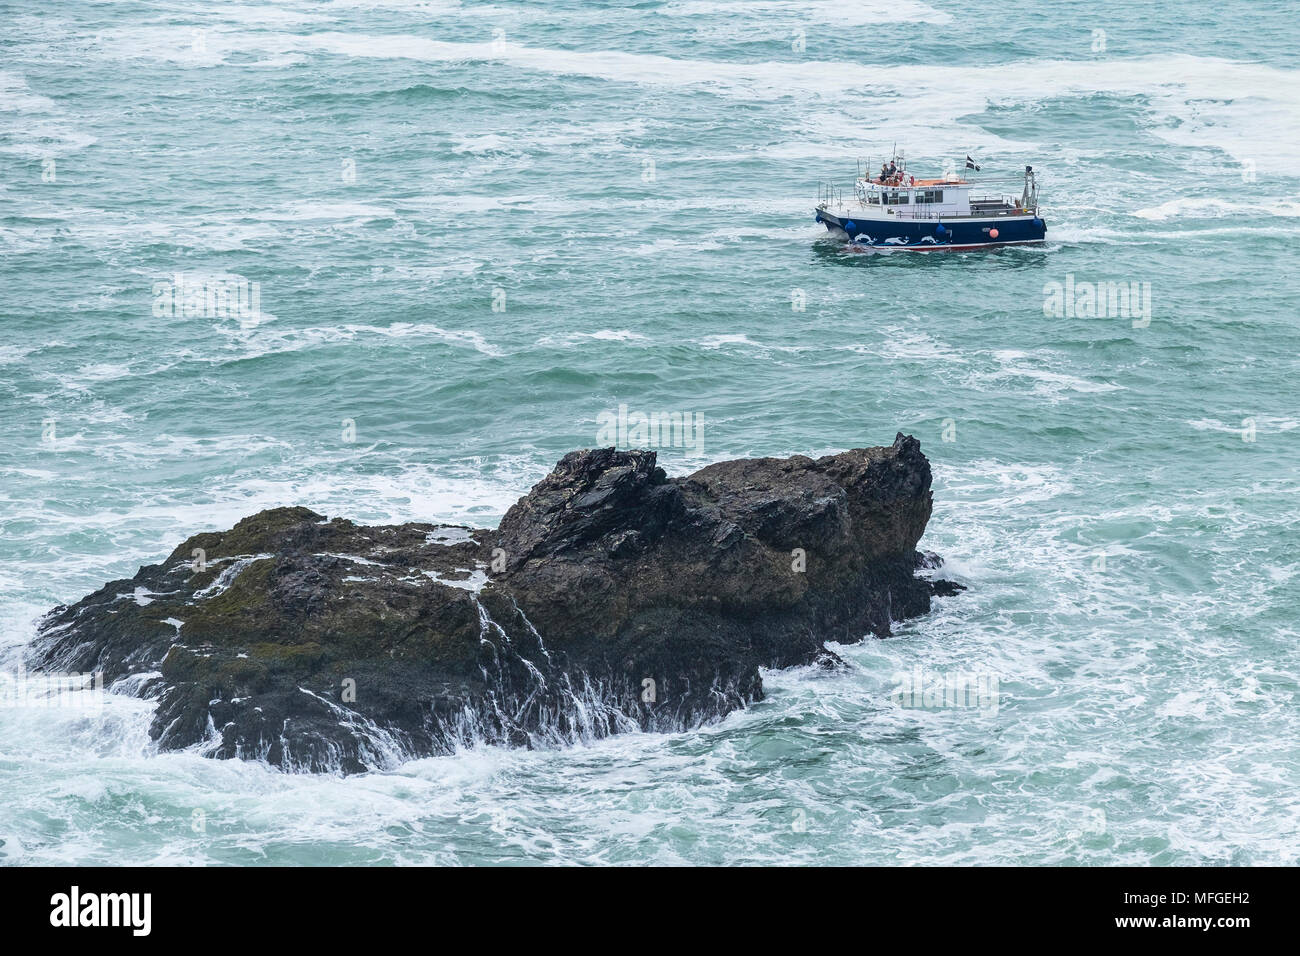 A sightseeing boat sailing past a small rocky island in the sea off the North Cornwall coast. Stock Photo